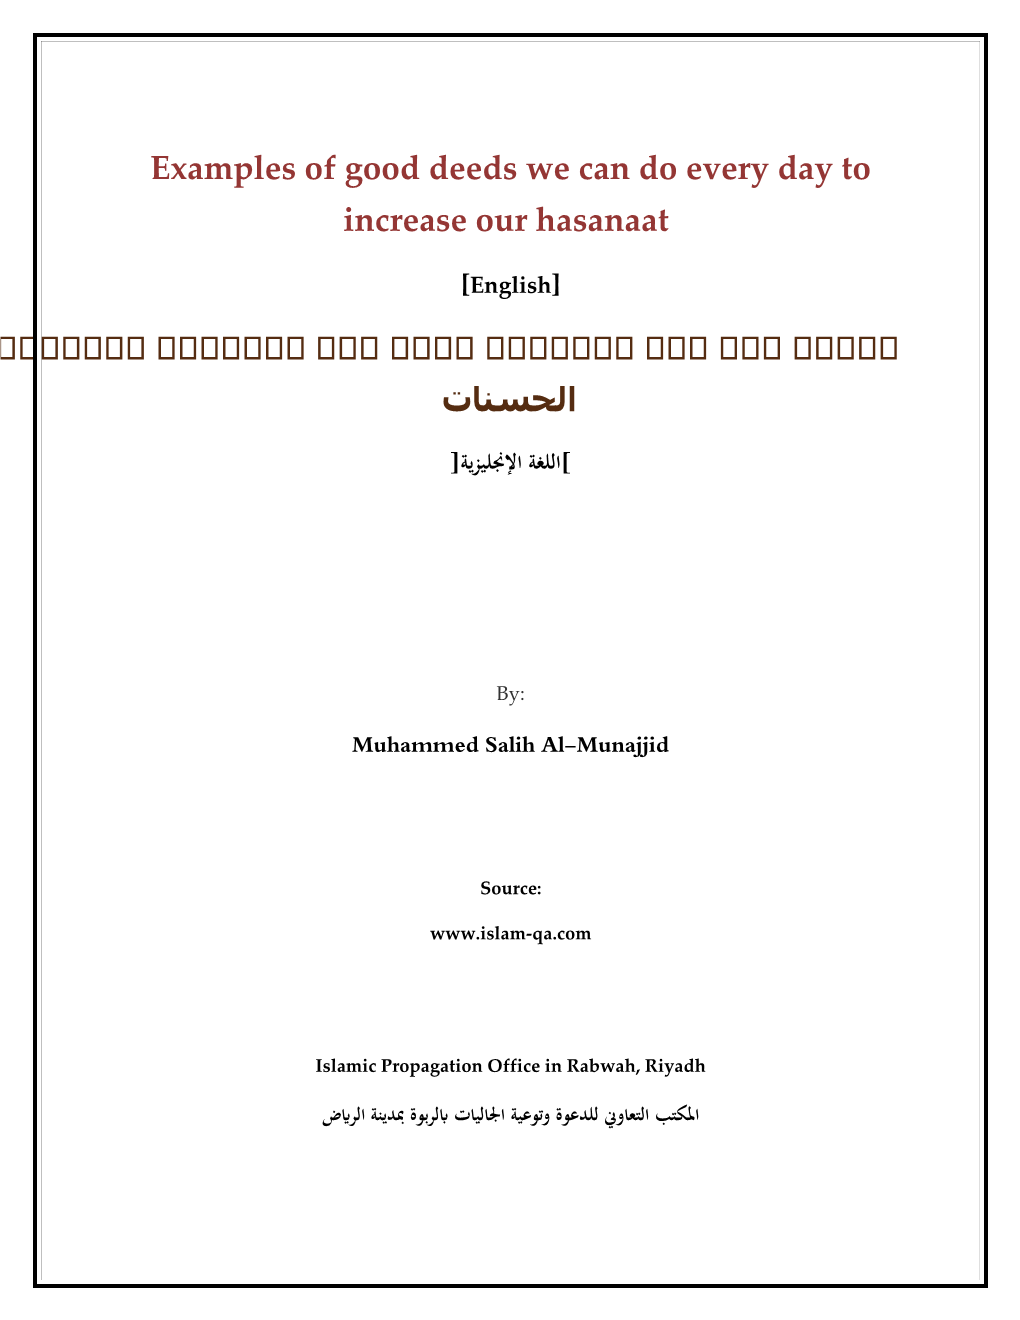 Examples of Good Deeds We Can Do Every Day to Increase Our Hasanaat